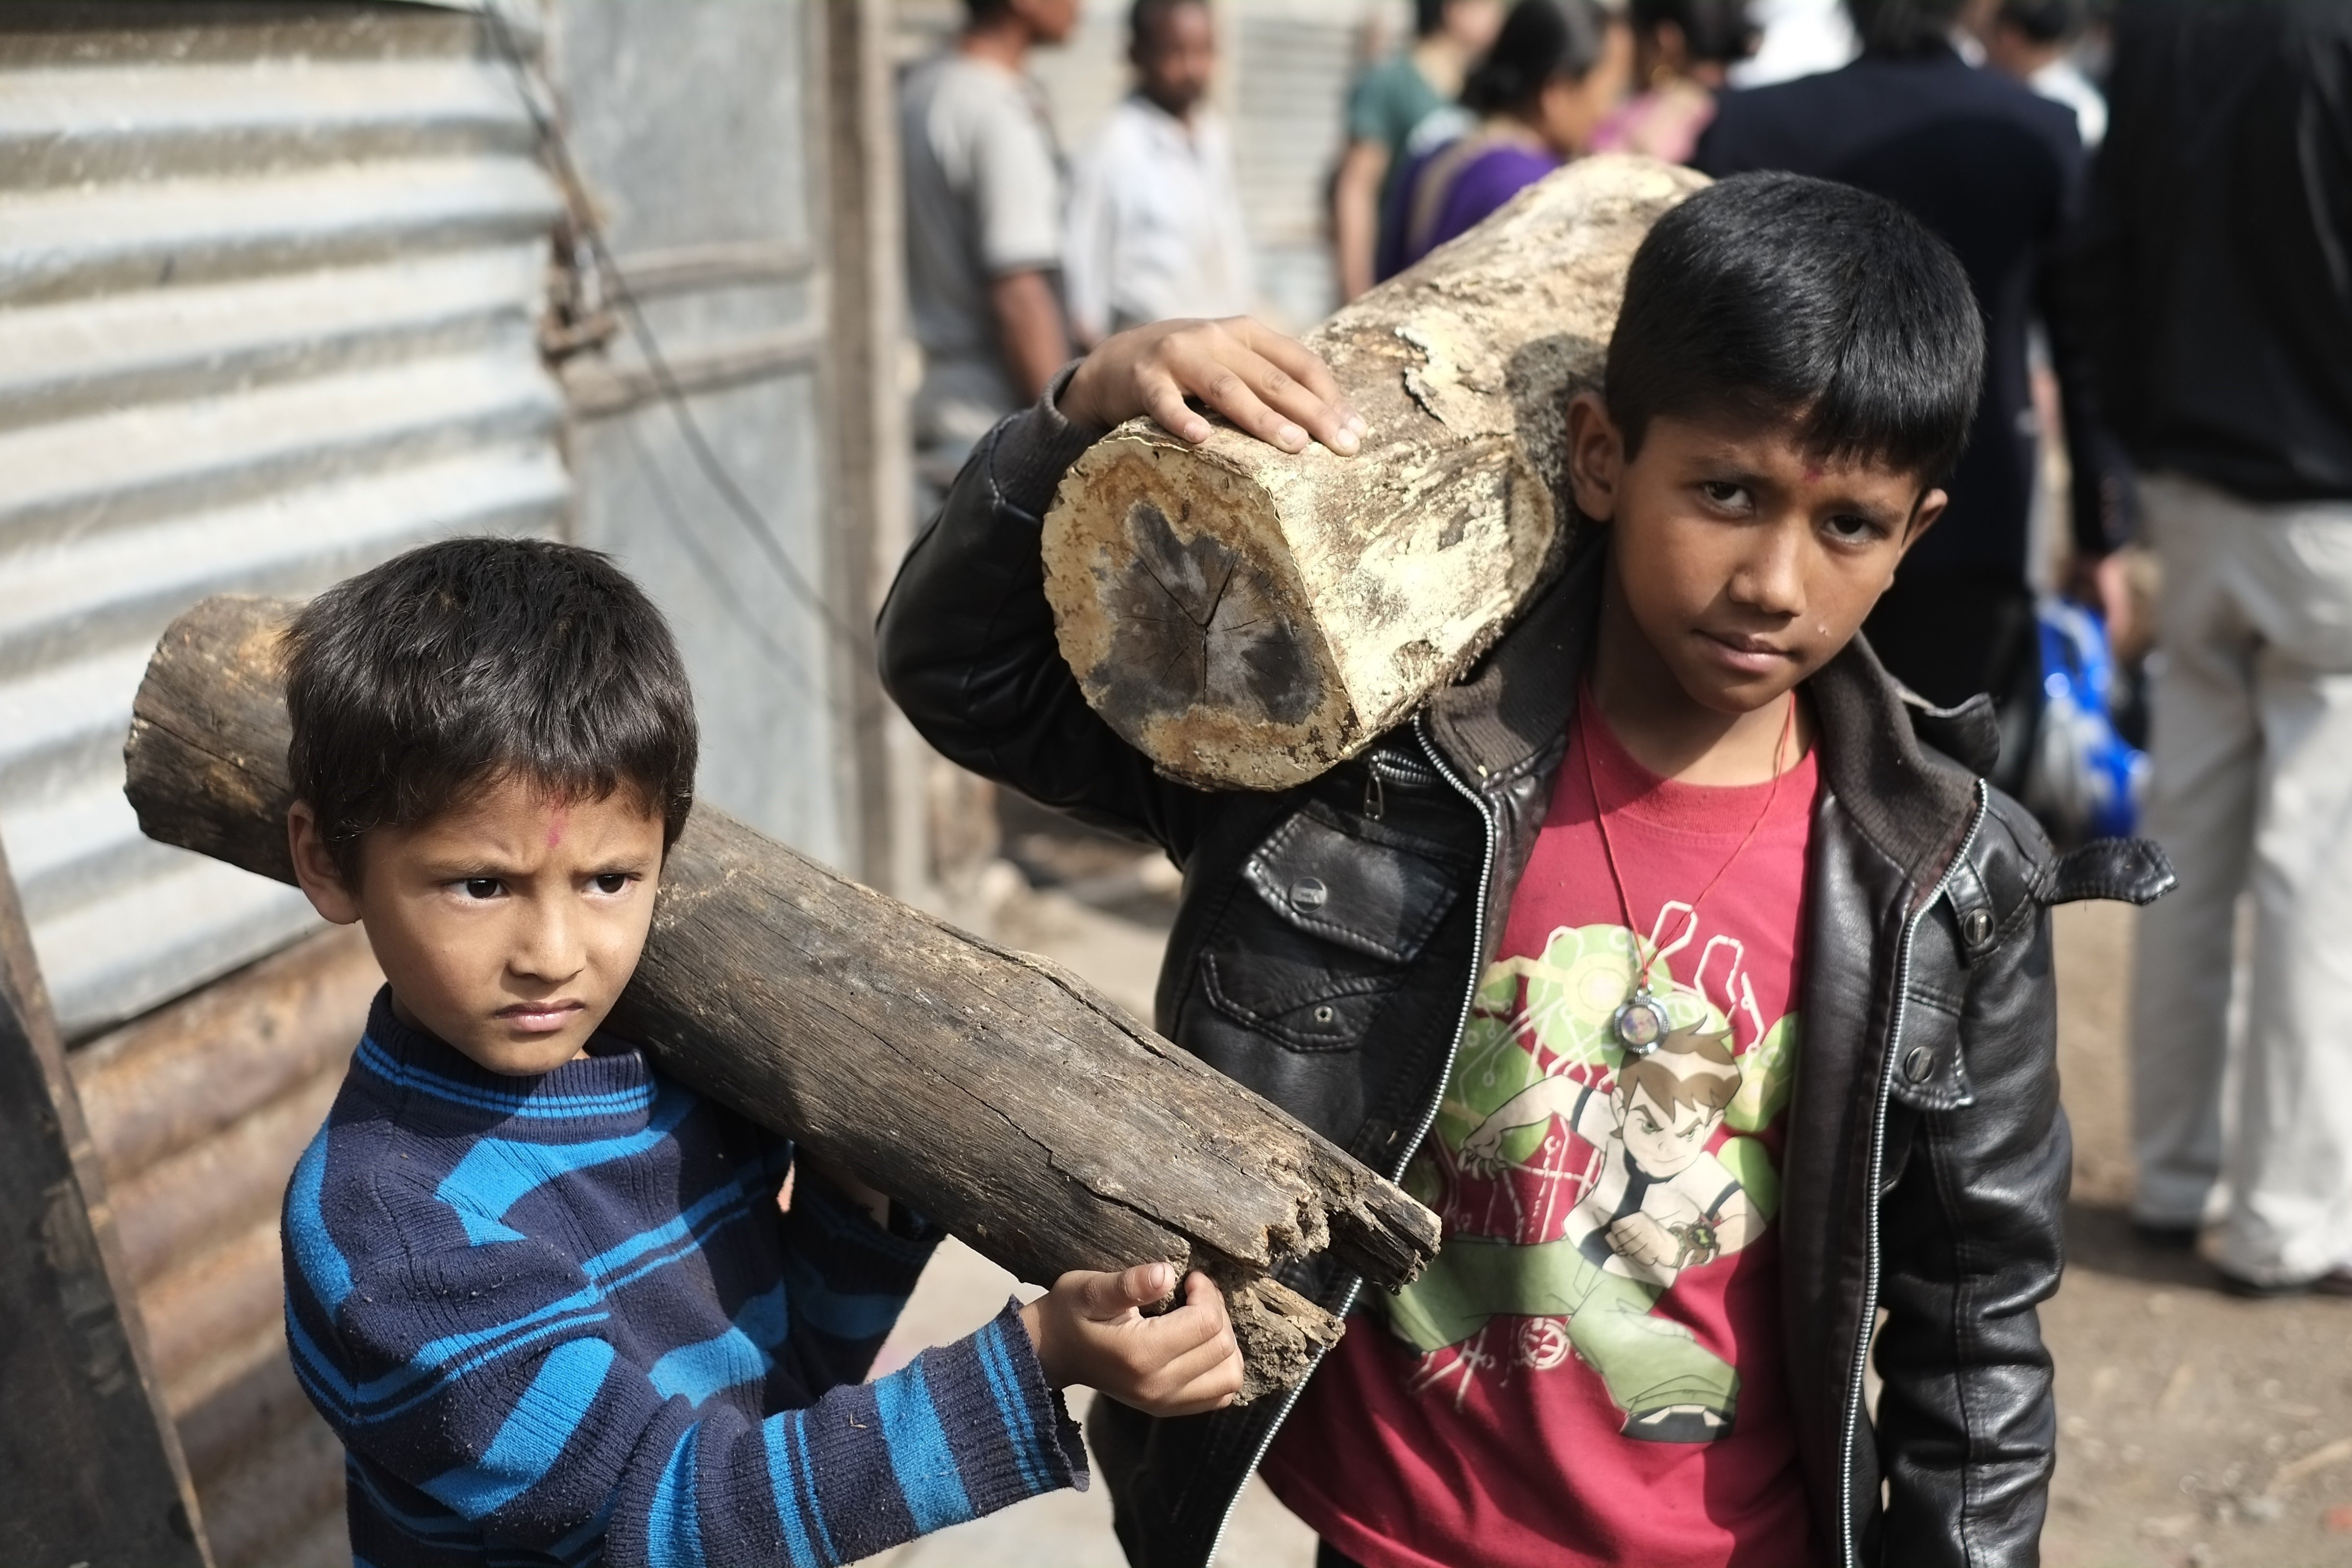 Nepalese boys carry firewood sold by the Nepal government in Kathmandu, Nepal on November 15, 2015. Nepal is facing fuel shortage due to a blockade by India as protests continue in the southern Terai region over the past three months. (Sunil Pradhan—Anadolu Agency/Getty Images)